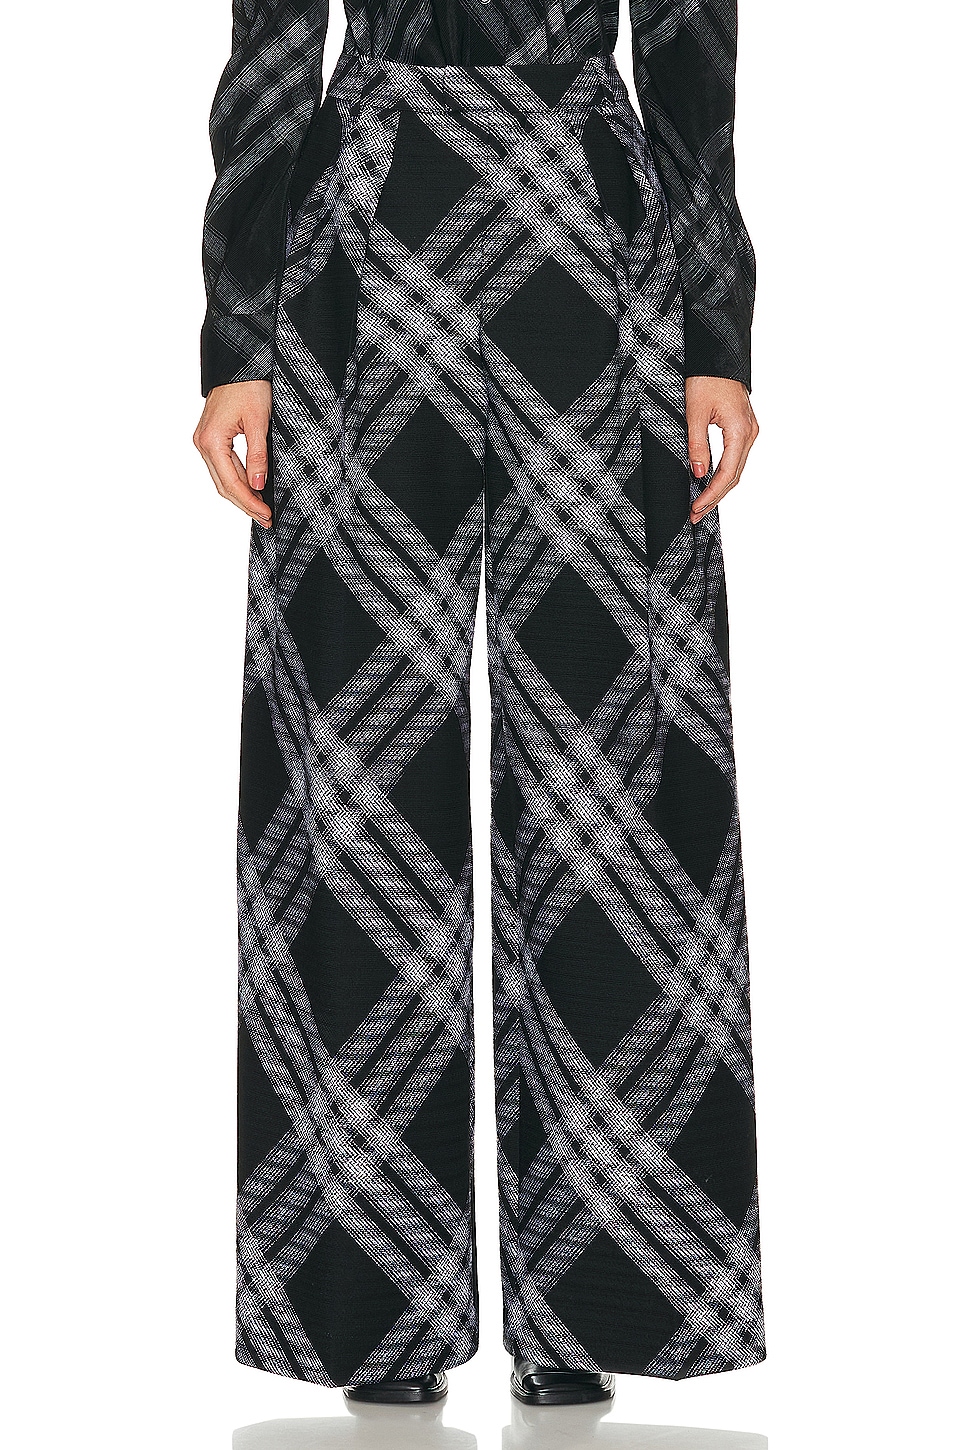 Image 1 of Burberry Tailored Trouser in Monochrome